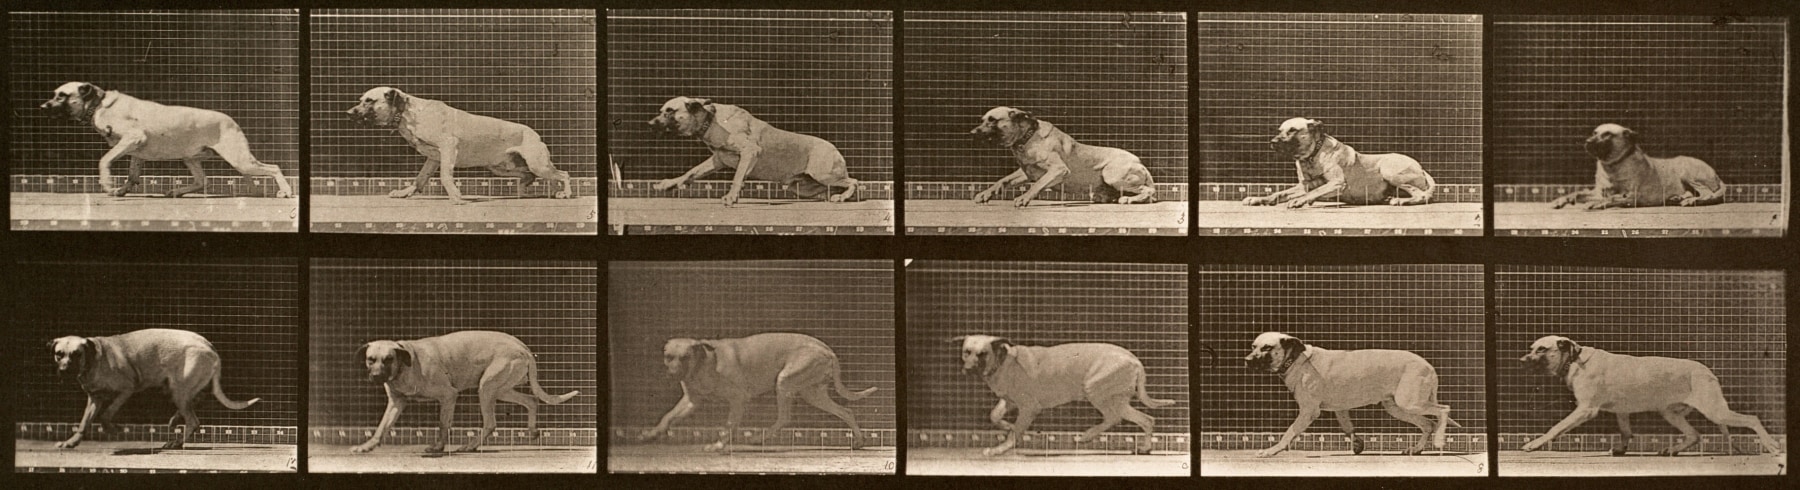 Sequence of black and white photos showing the movements of a mastiff dog getting off the ground